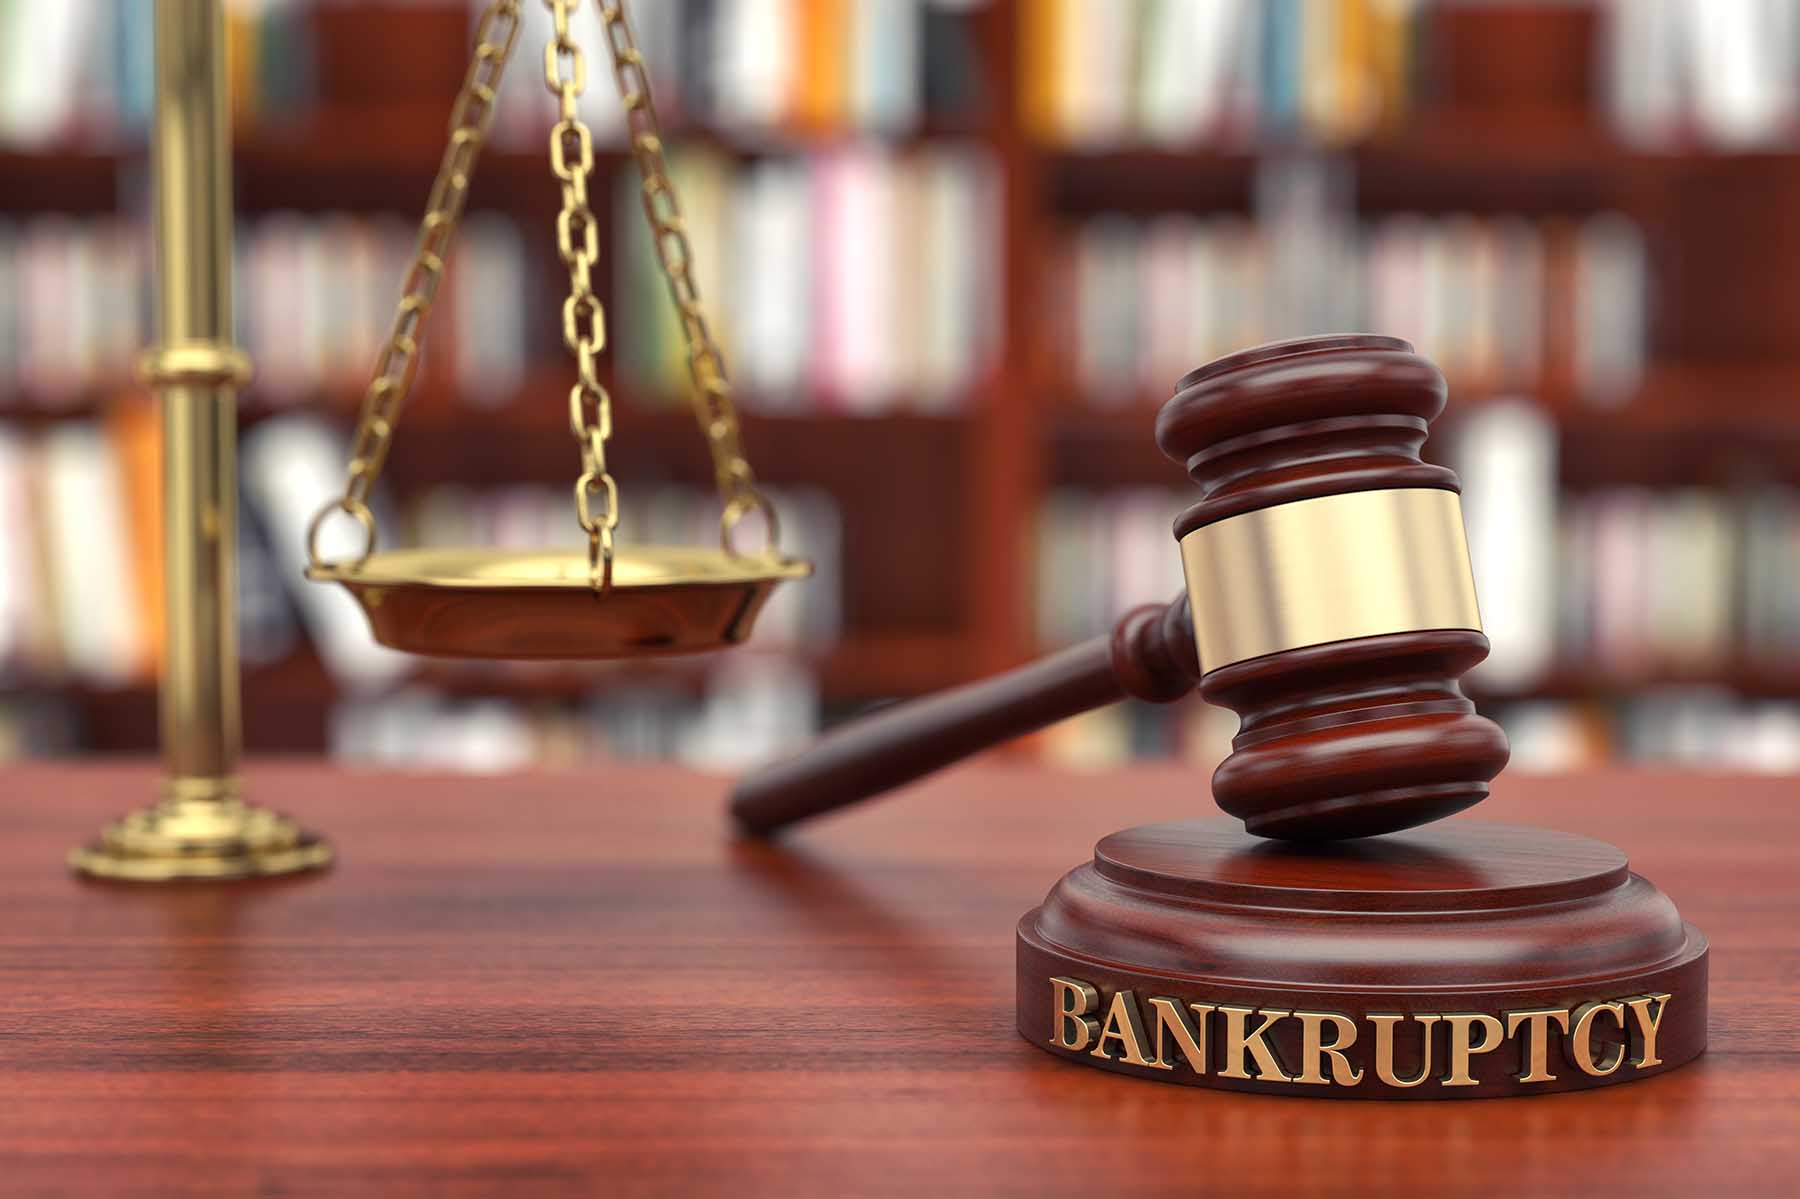 Bankruptcy Law. Gavel and word Bankruptcy on sound block